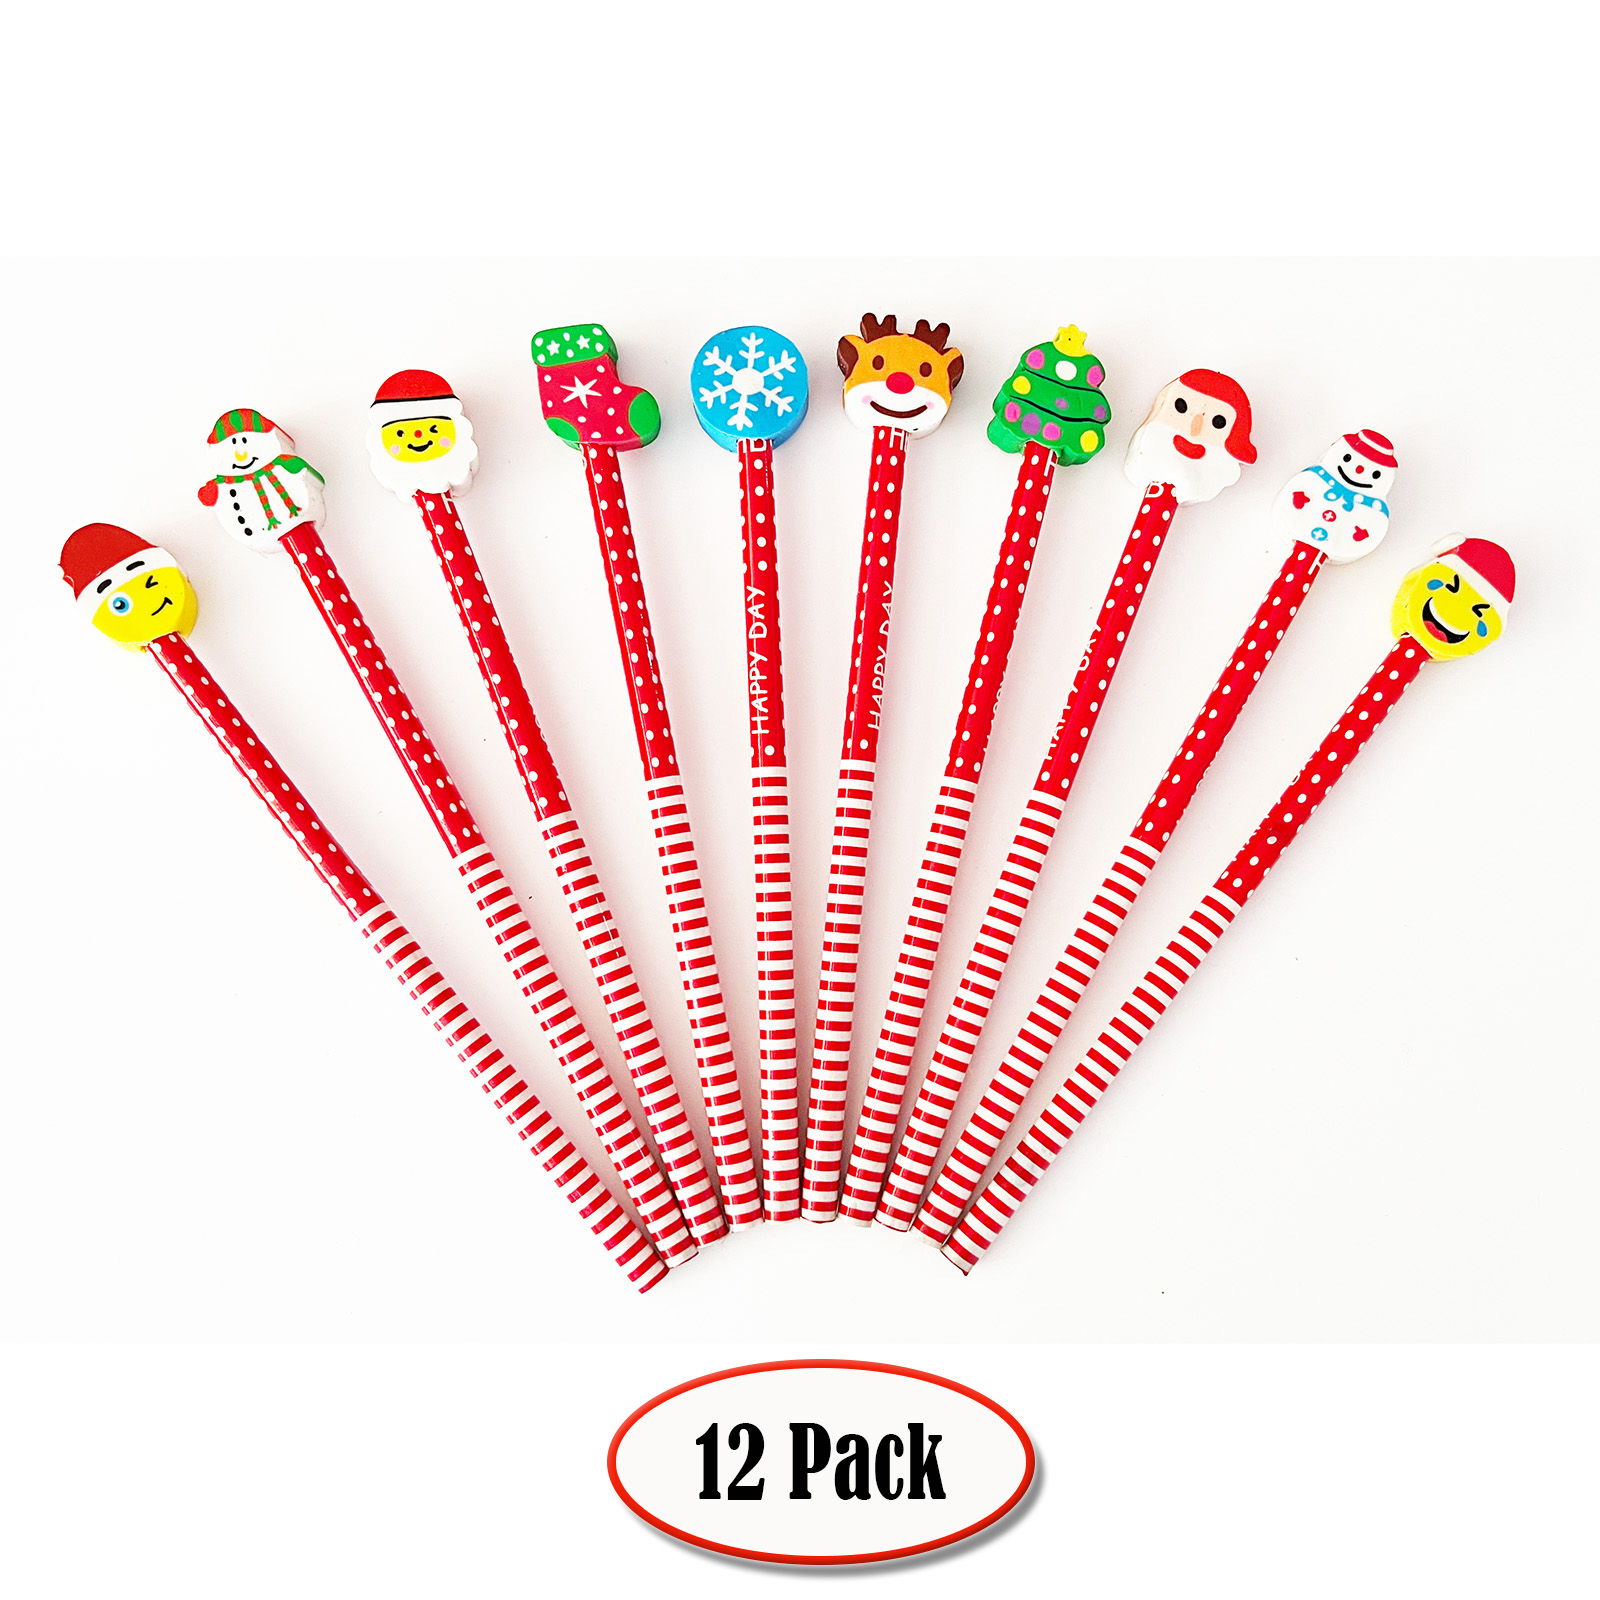 40 Pack Kids Wooden Pencils With Cute Cartoon Animal Eraser Toppers Fun  Pencils Assorted Colorful Graphite Pencils With Rubbers Set For School  Supplies Children Prize Present 